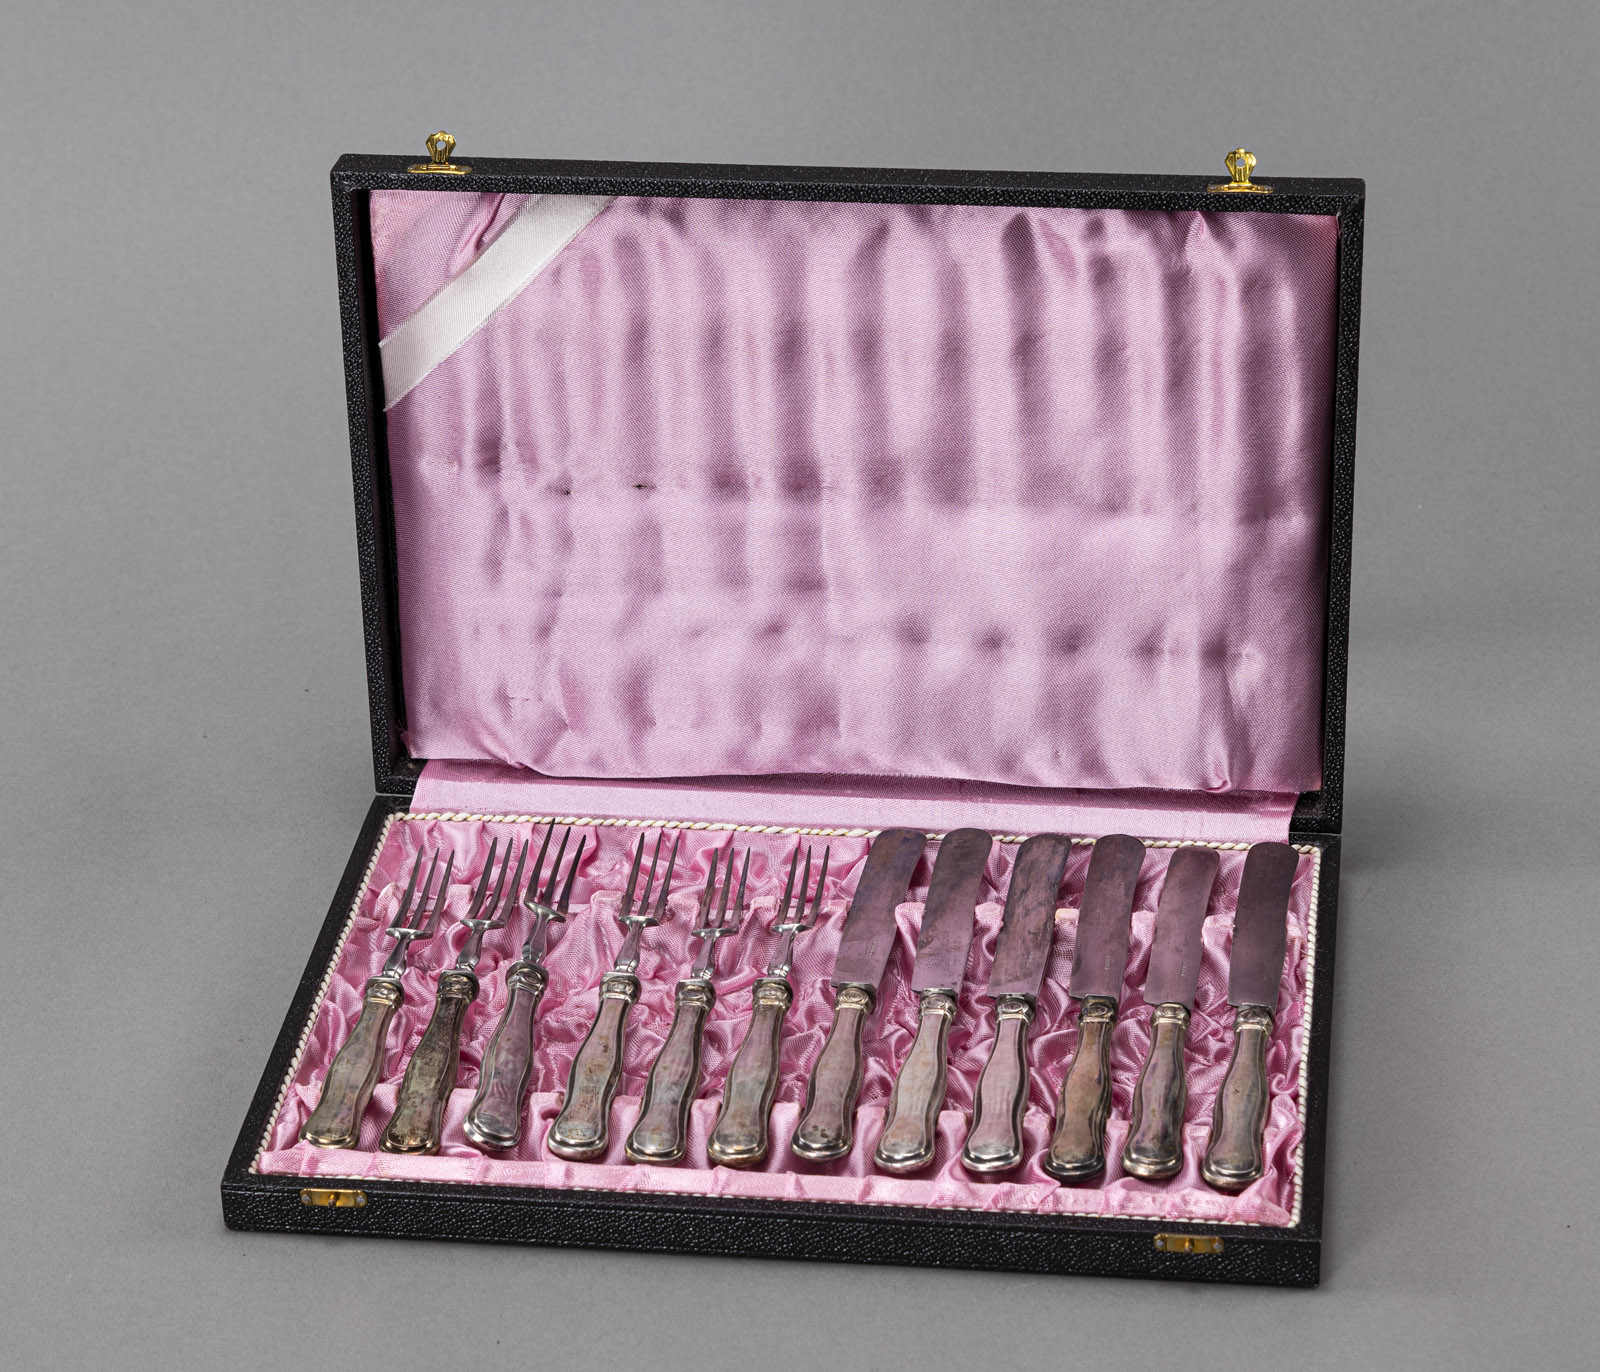 FRUIT CUTLERY AND FISH CUTLERY IN BOXES - Image 3 of 8